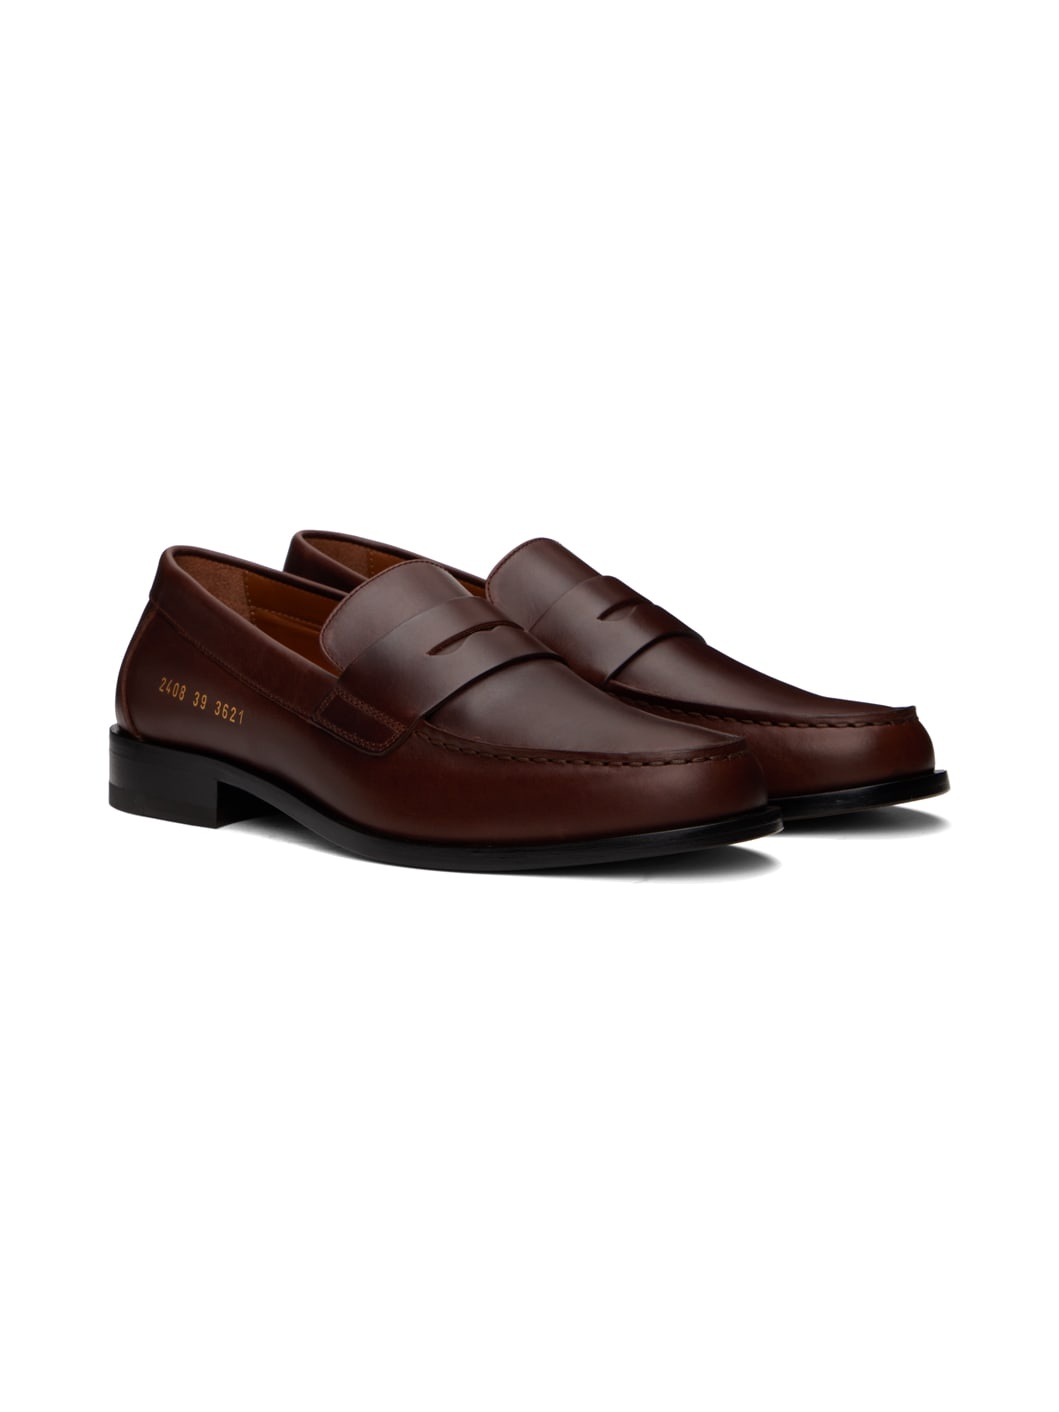 Brown Leather Loafers - 4